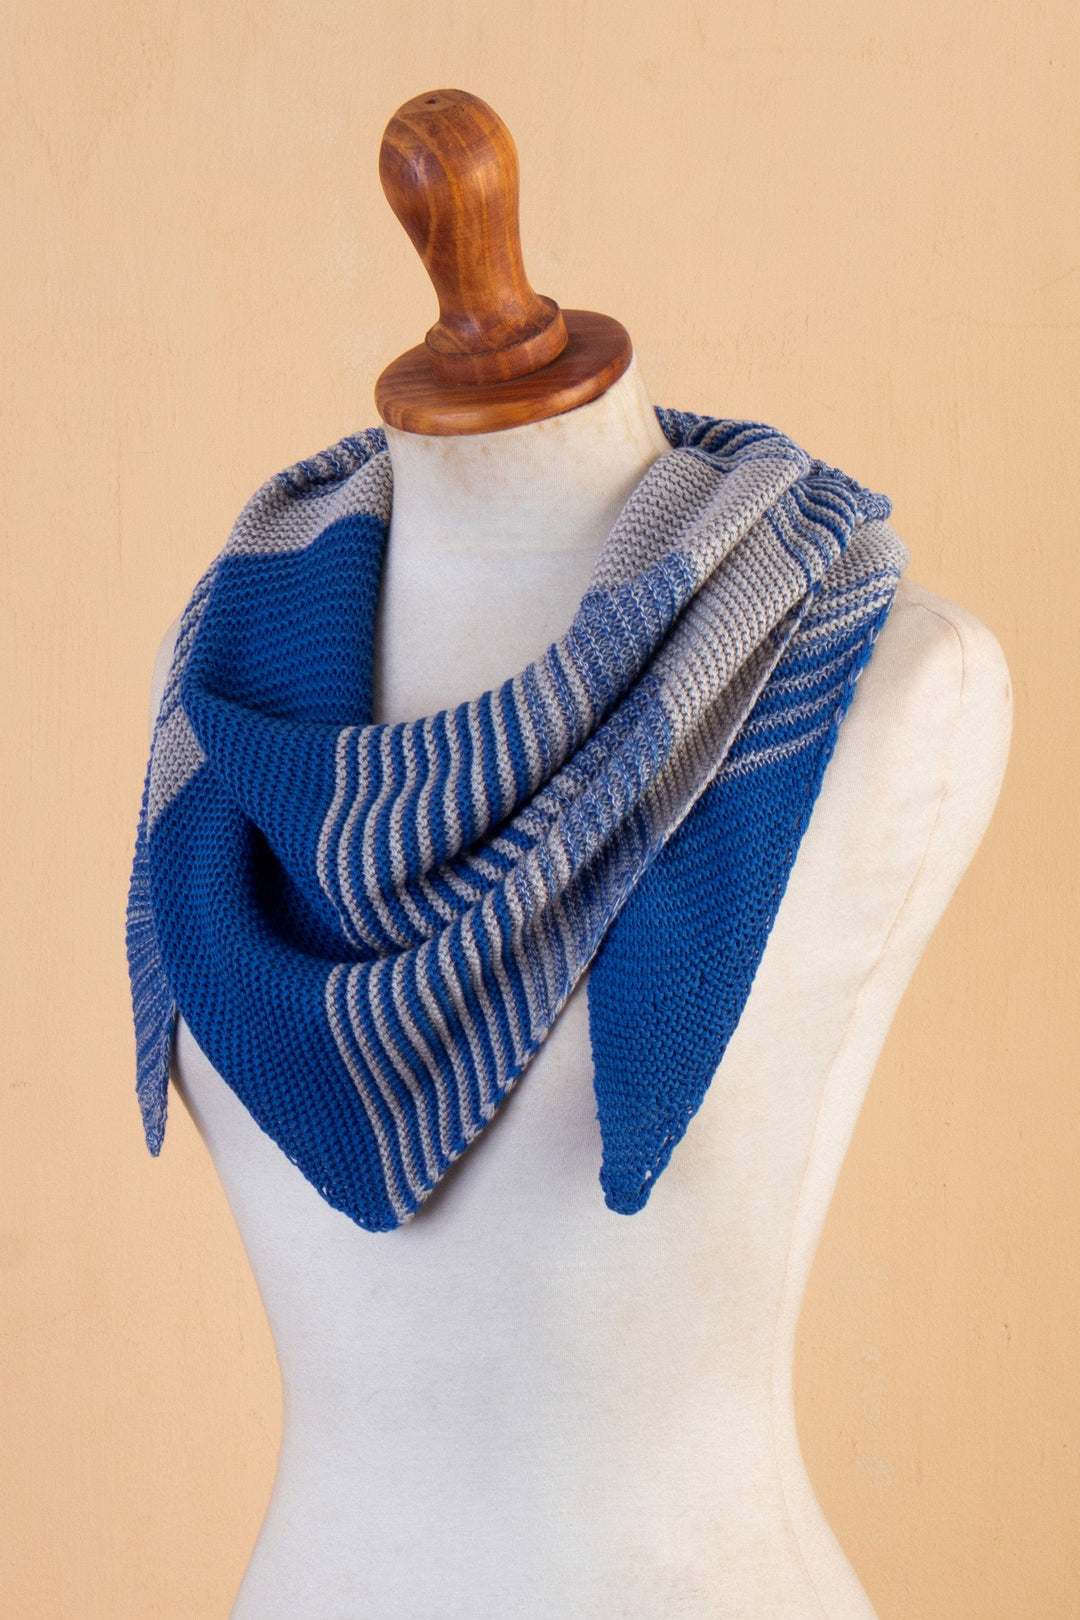 Blue & Grey Cotton Blend Scarf Hand-Knit in Triangle Shape